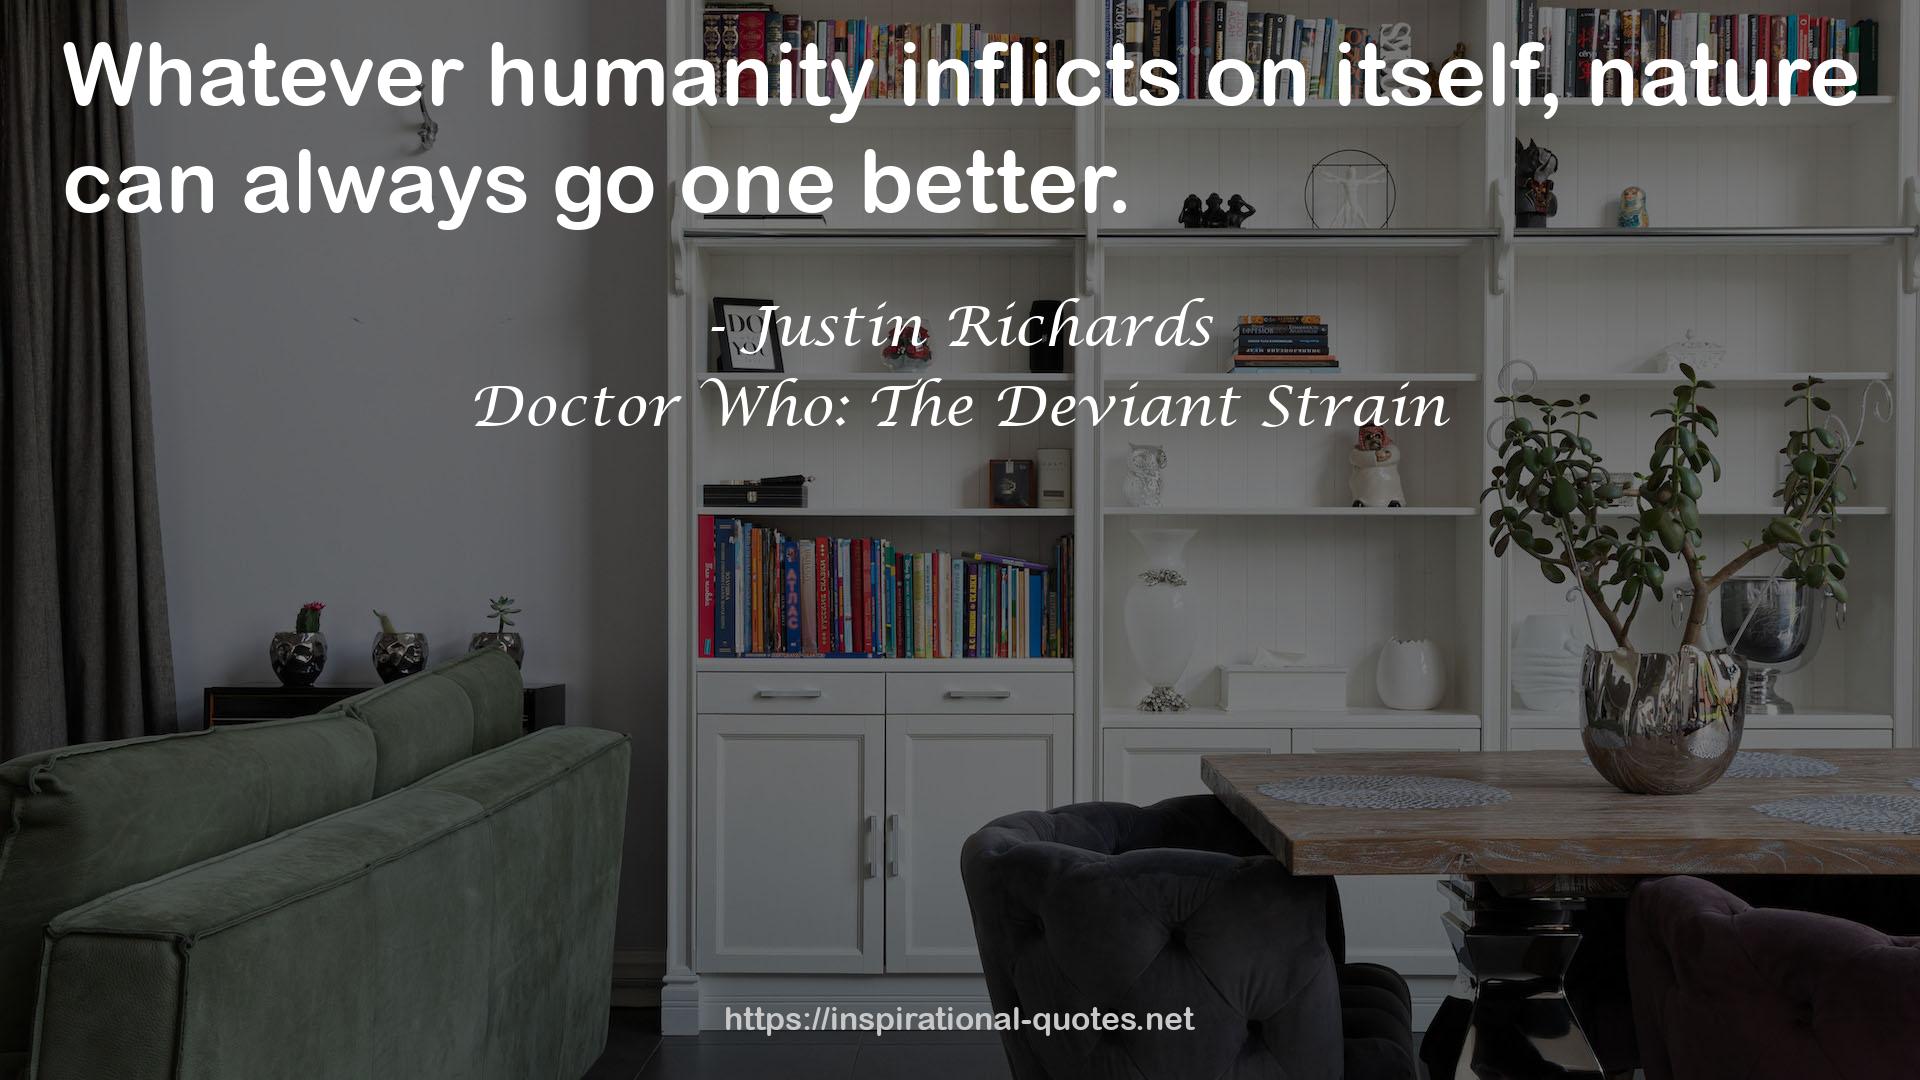 Doctor Who: The Deviant Strain QUOTES